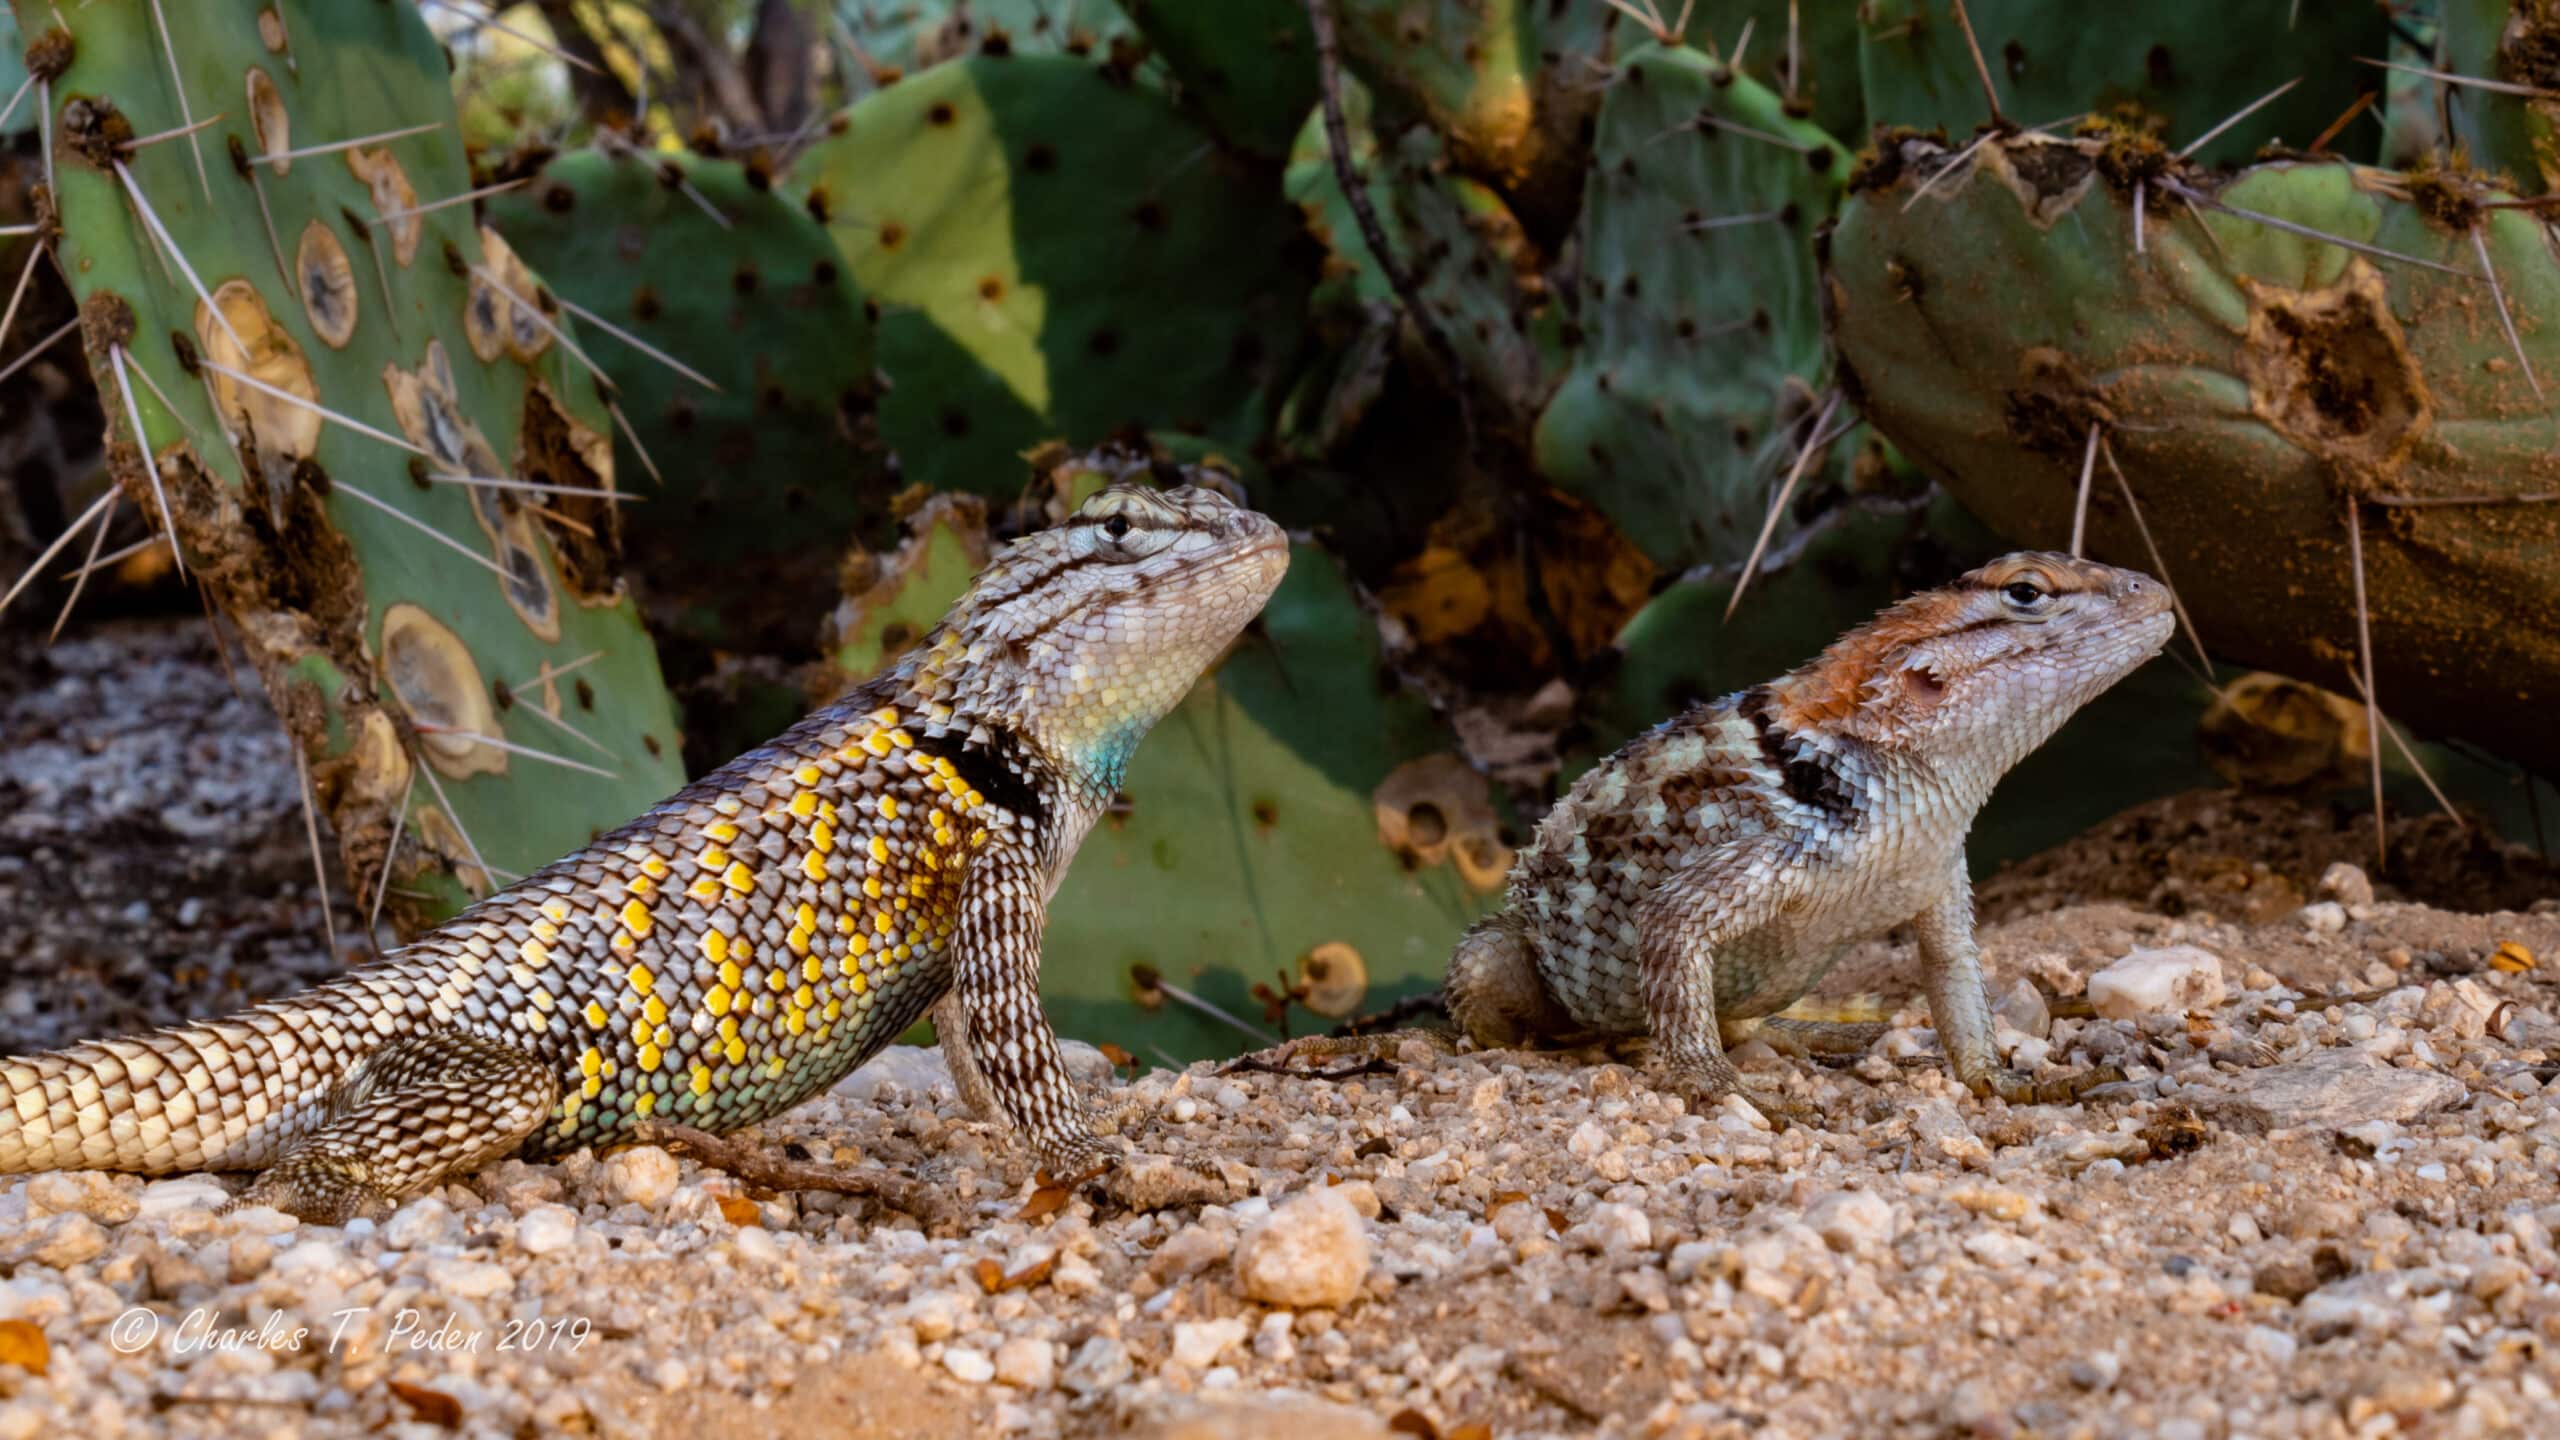 Male and female desert spiny lizards. A bonded couple who live in my backyard.